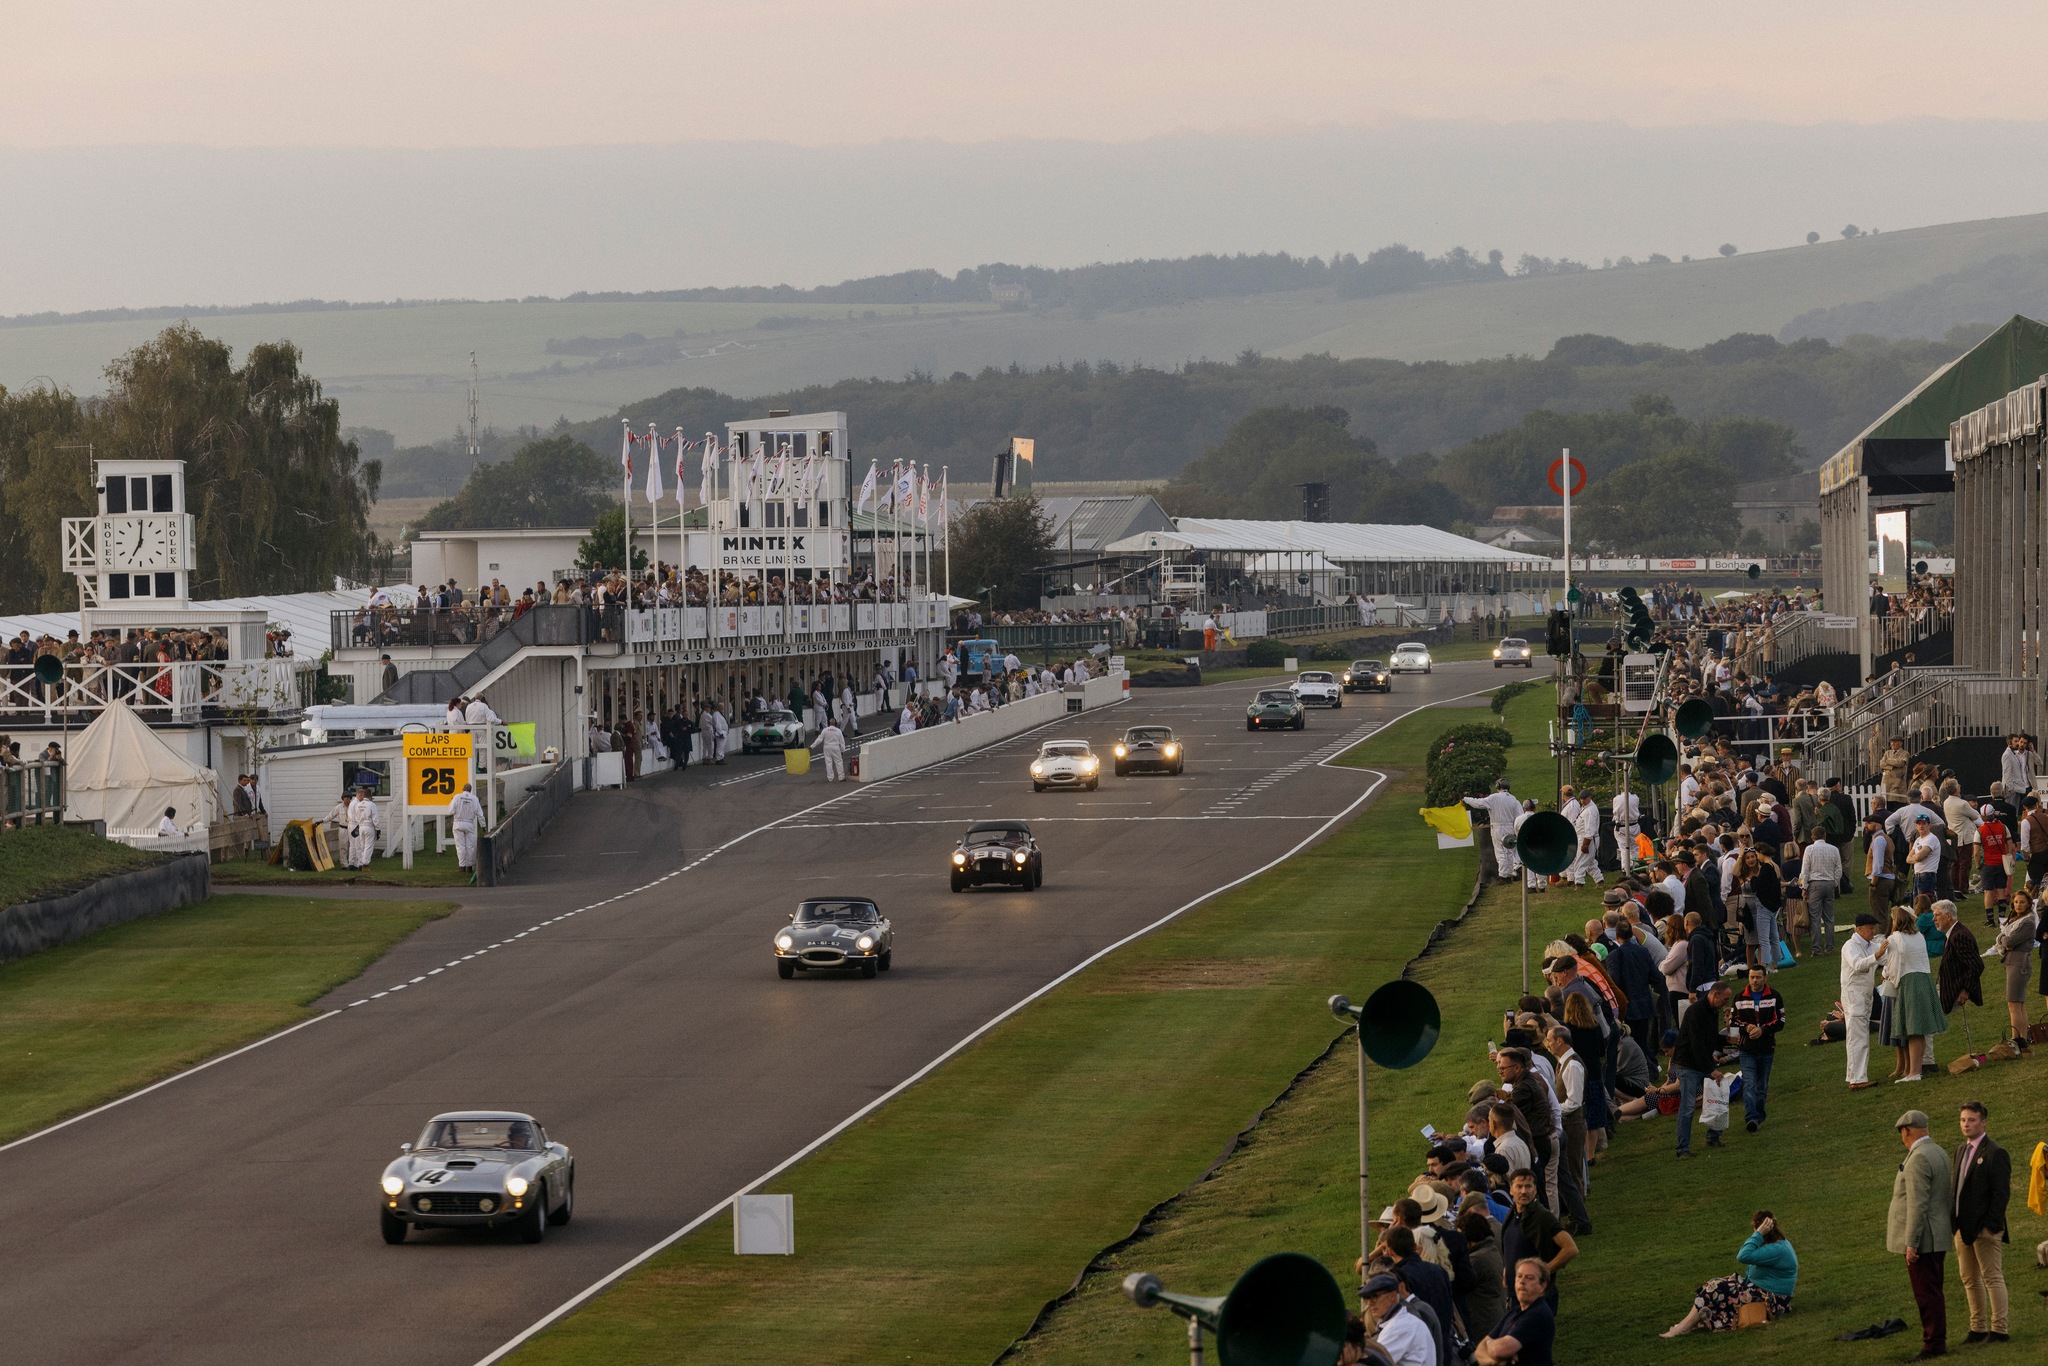 The Greatest Show On Earth: The Goodwood Revival